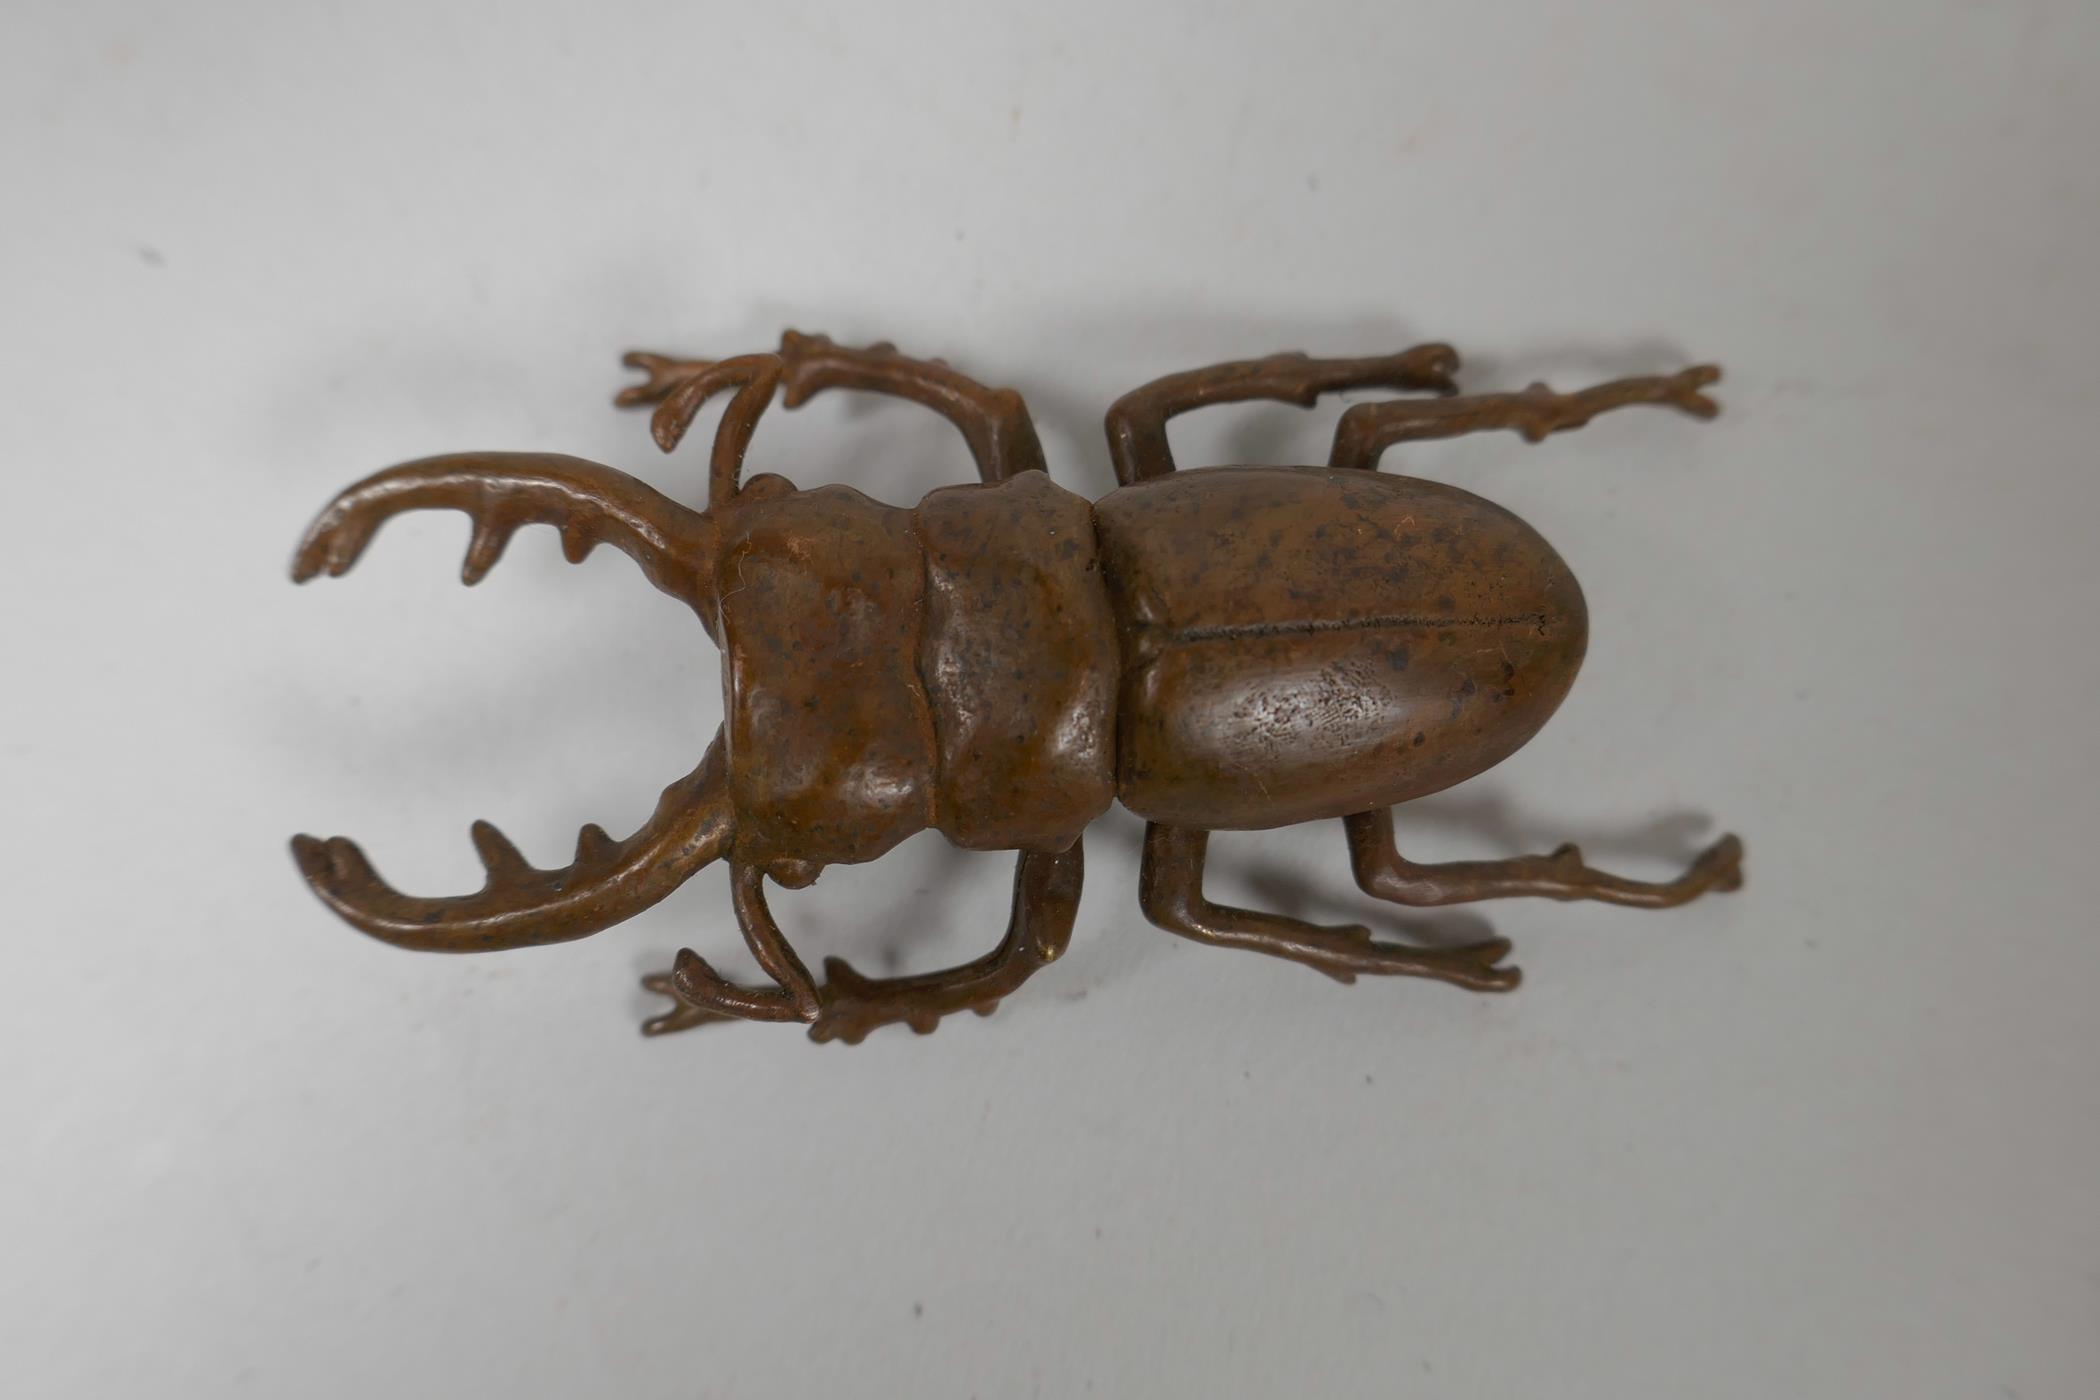 A Japanese Jizai style bronze of a beetle, indistinct impressed marks to base, 3" long - Image 2 of 3